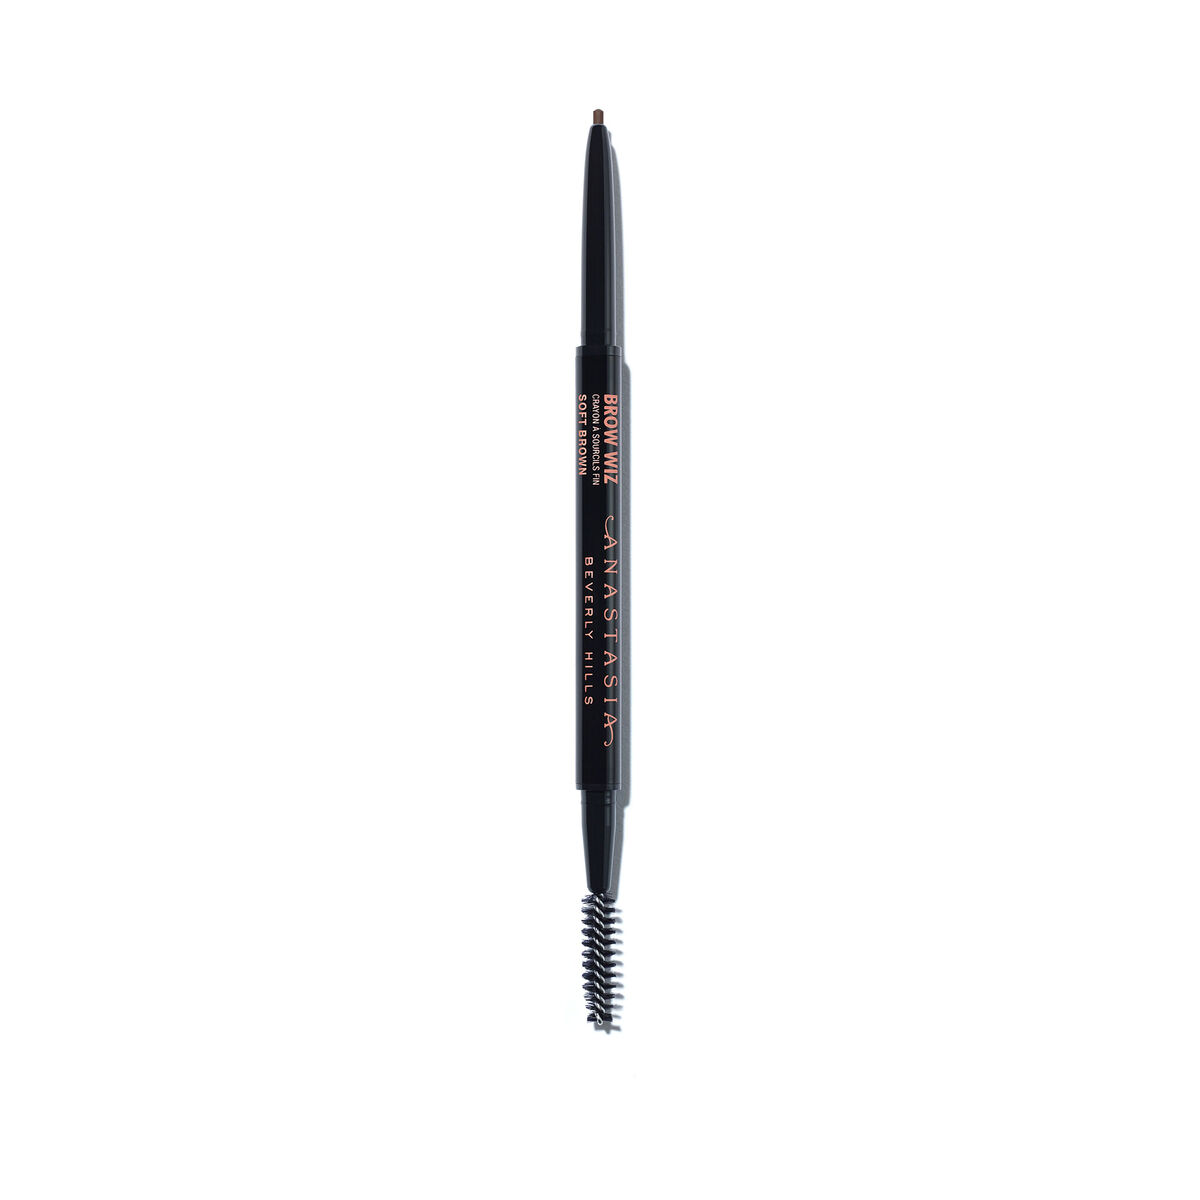 Picture of Anastasia Beverly Hills 340775 0.003 oz Anastasia Beverly Hills Brow Wiz Skinny Brow Pencil for Women, Soft Brown